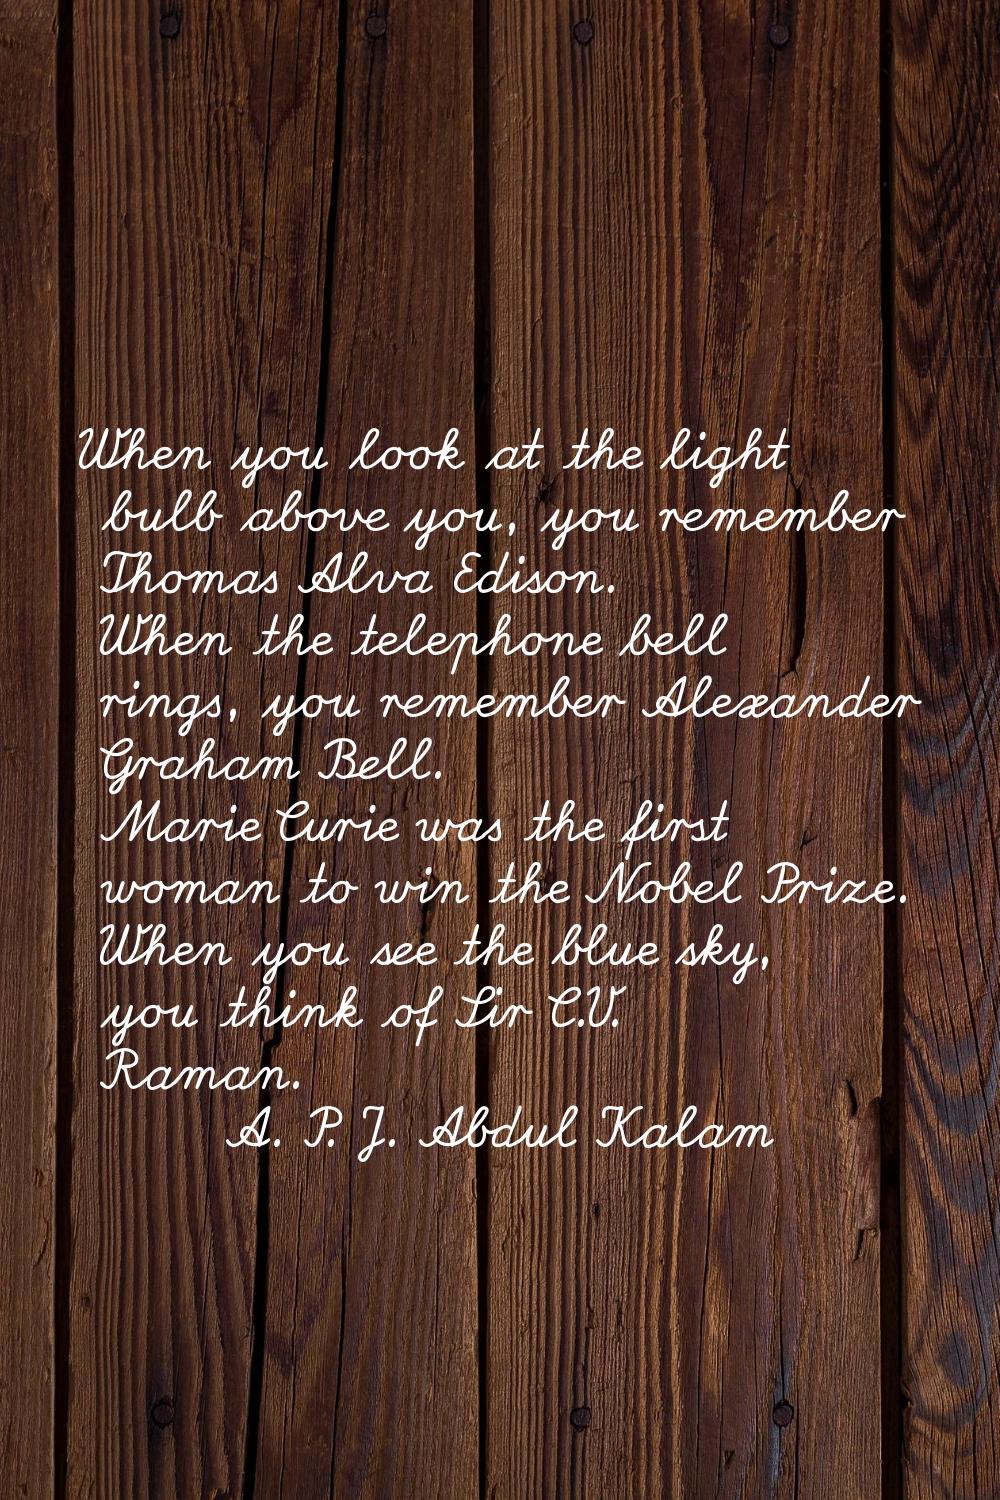 When you look at the light bulb above you, you remember Thomas Alva Edison. When the telephone bell